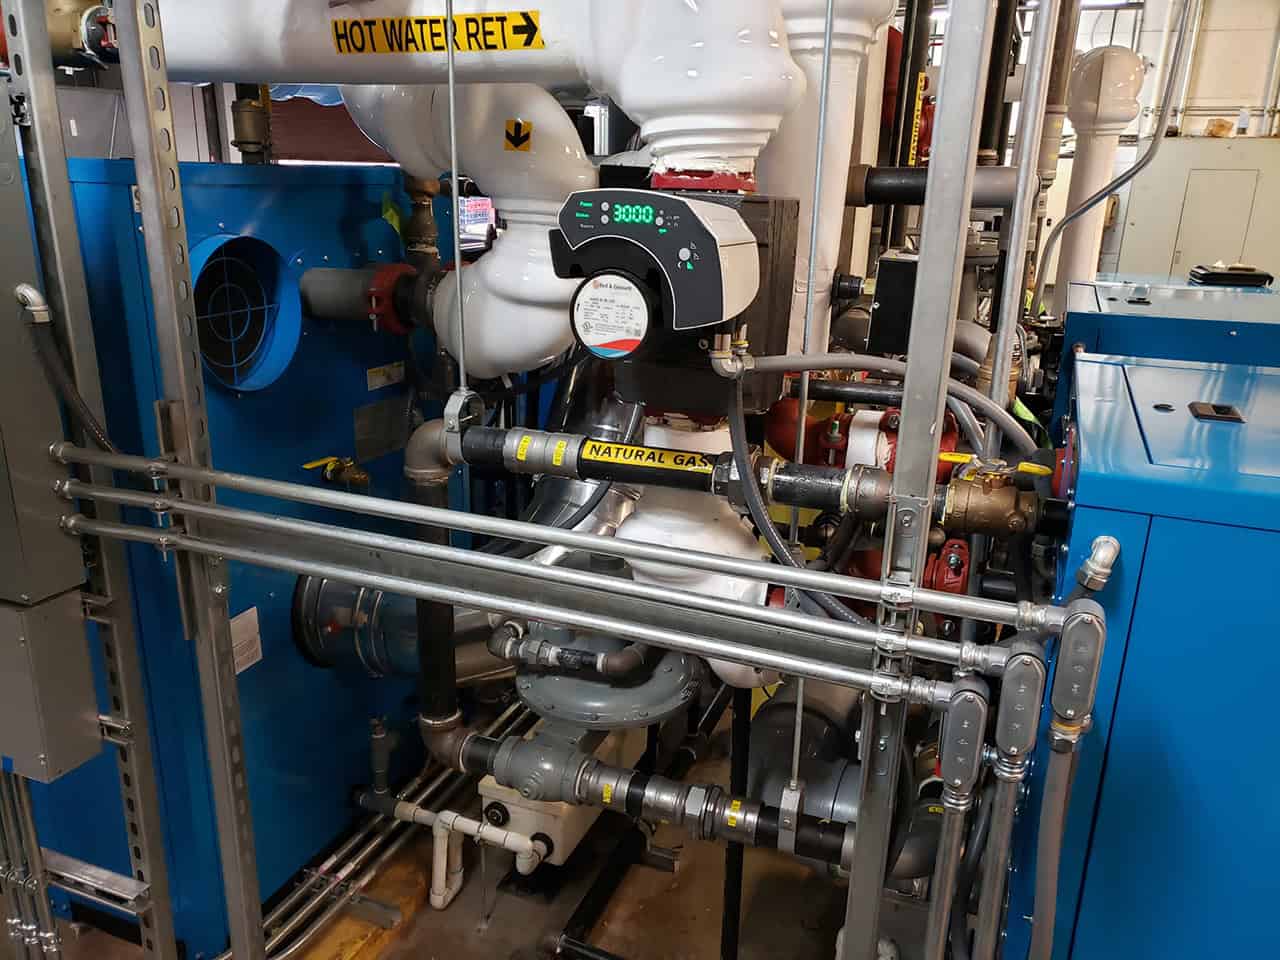 Pipes and controls on a commercial boiler system.